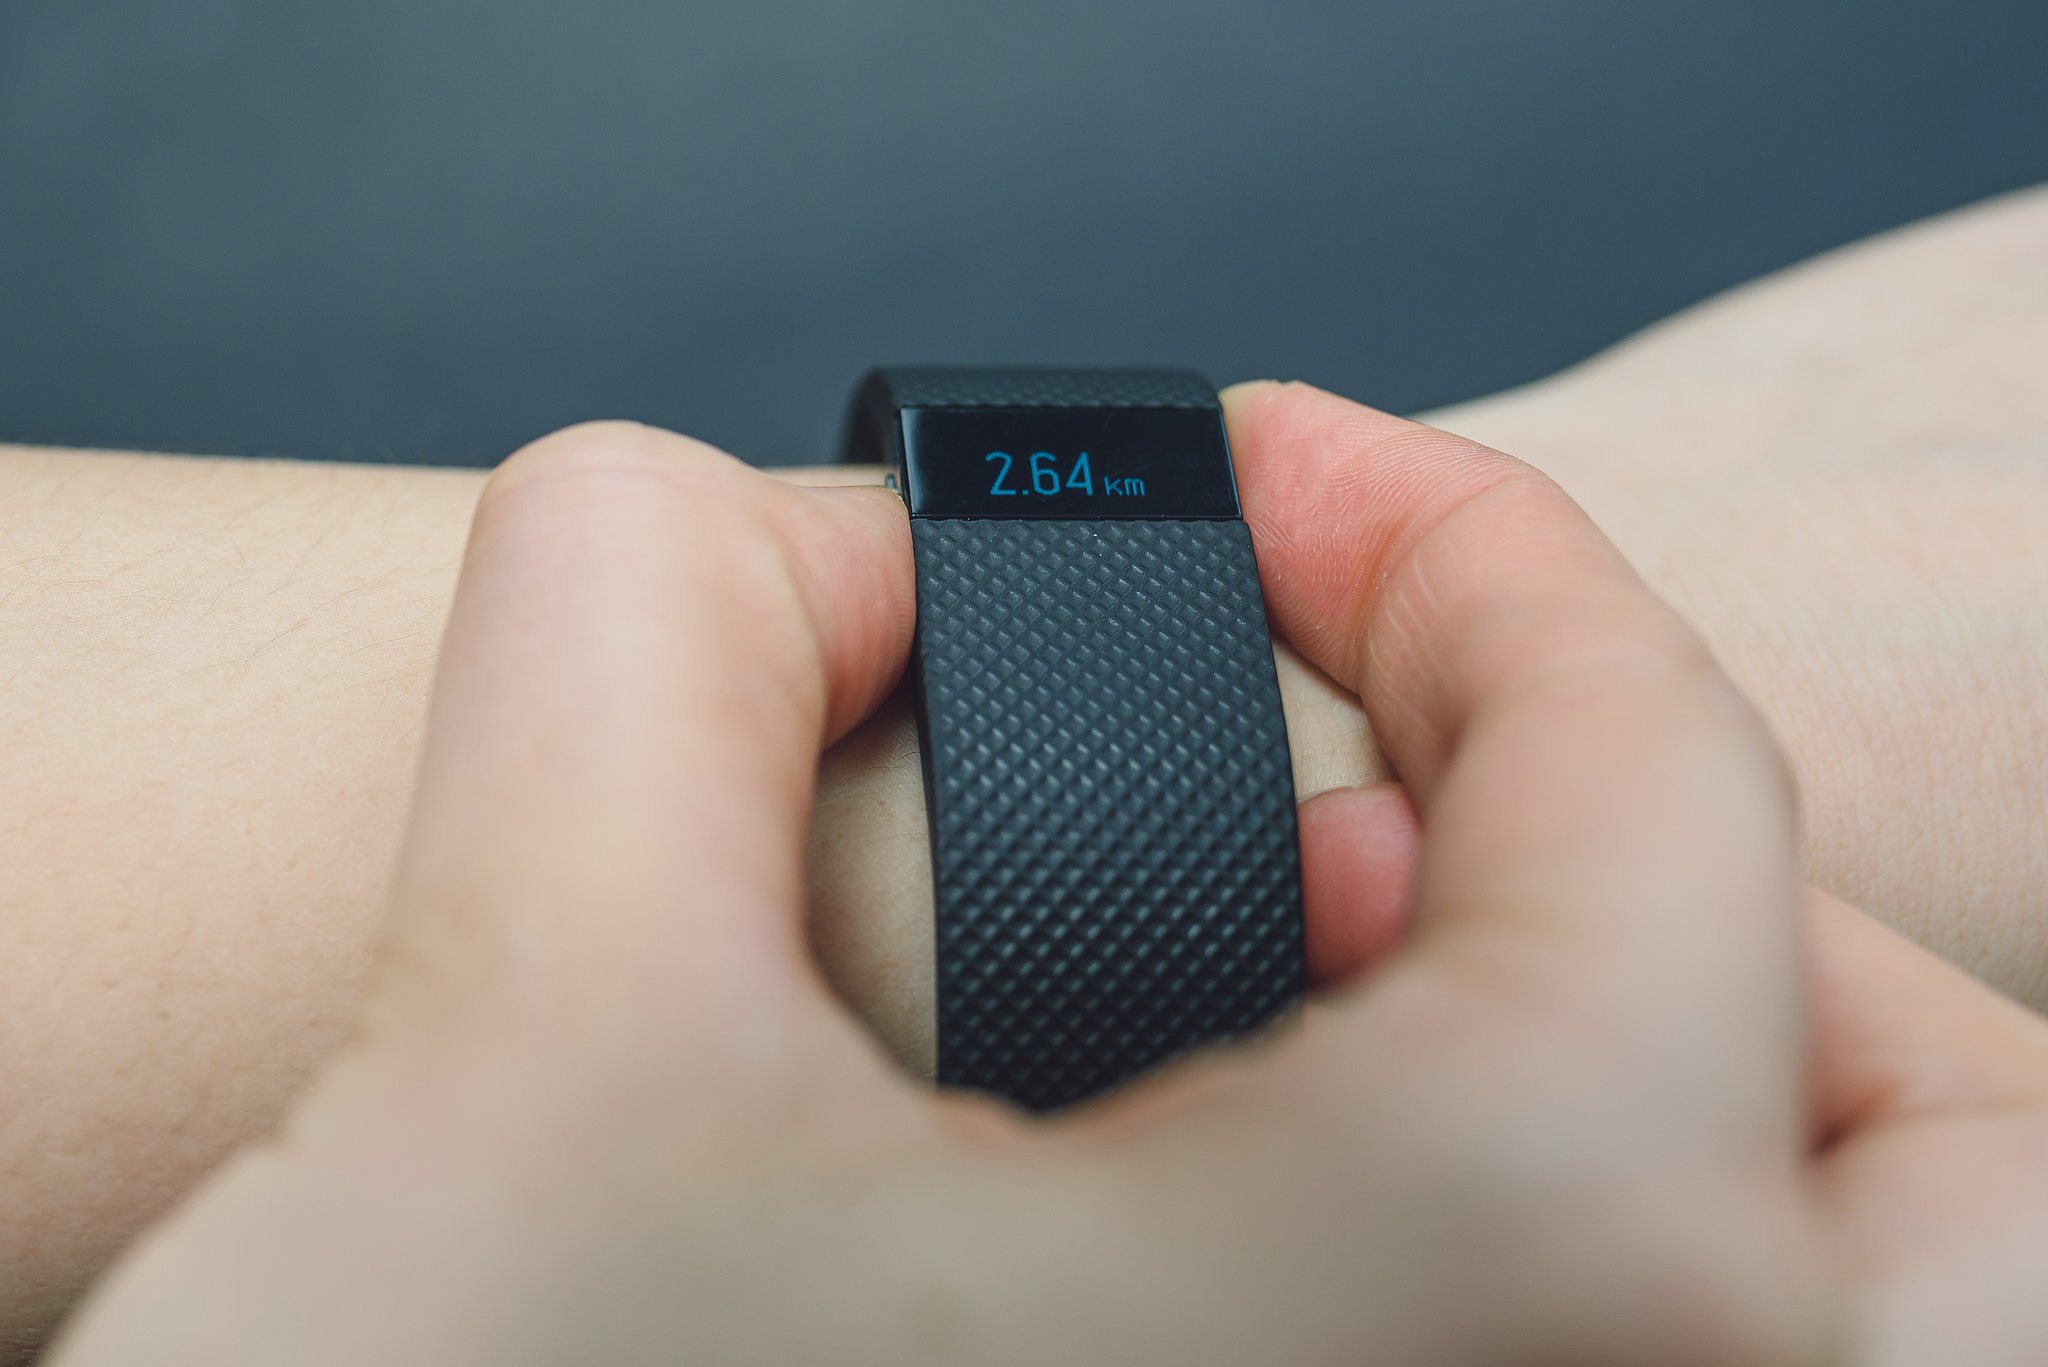 The Amazing Way This Fitbit Saved a Man's Life